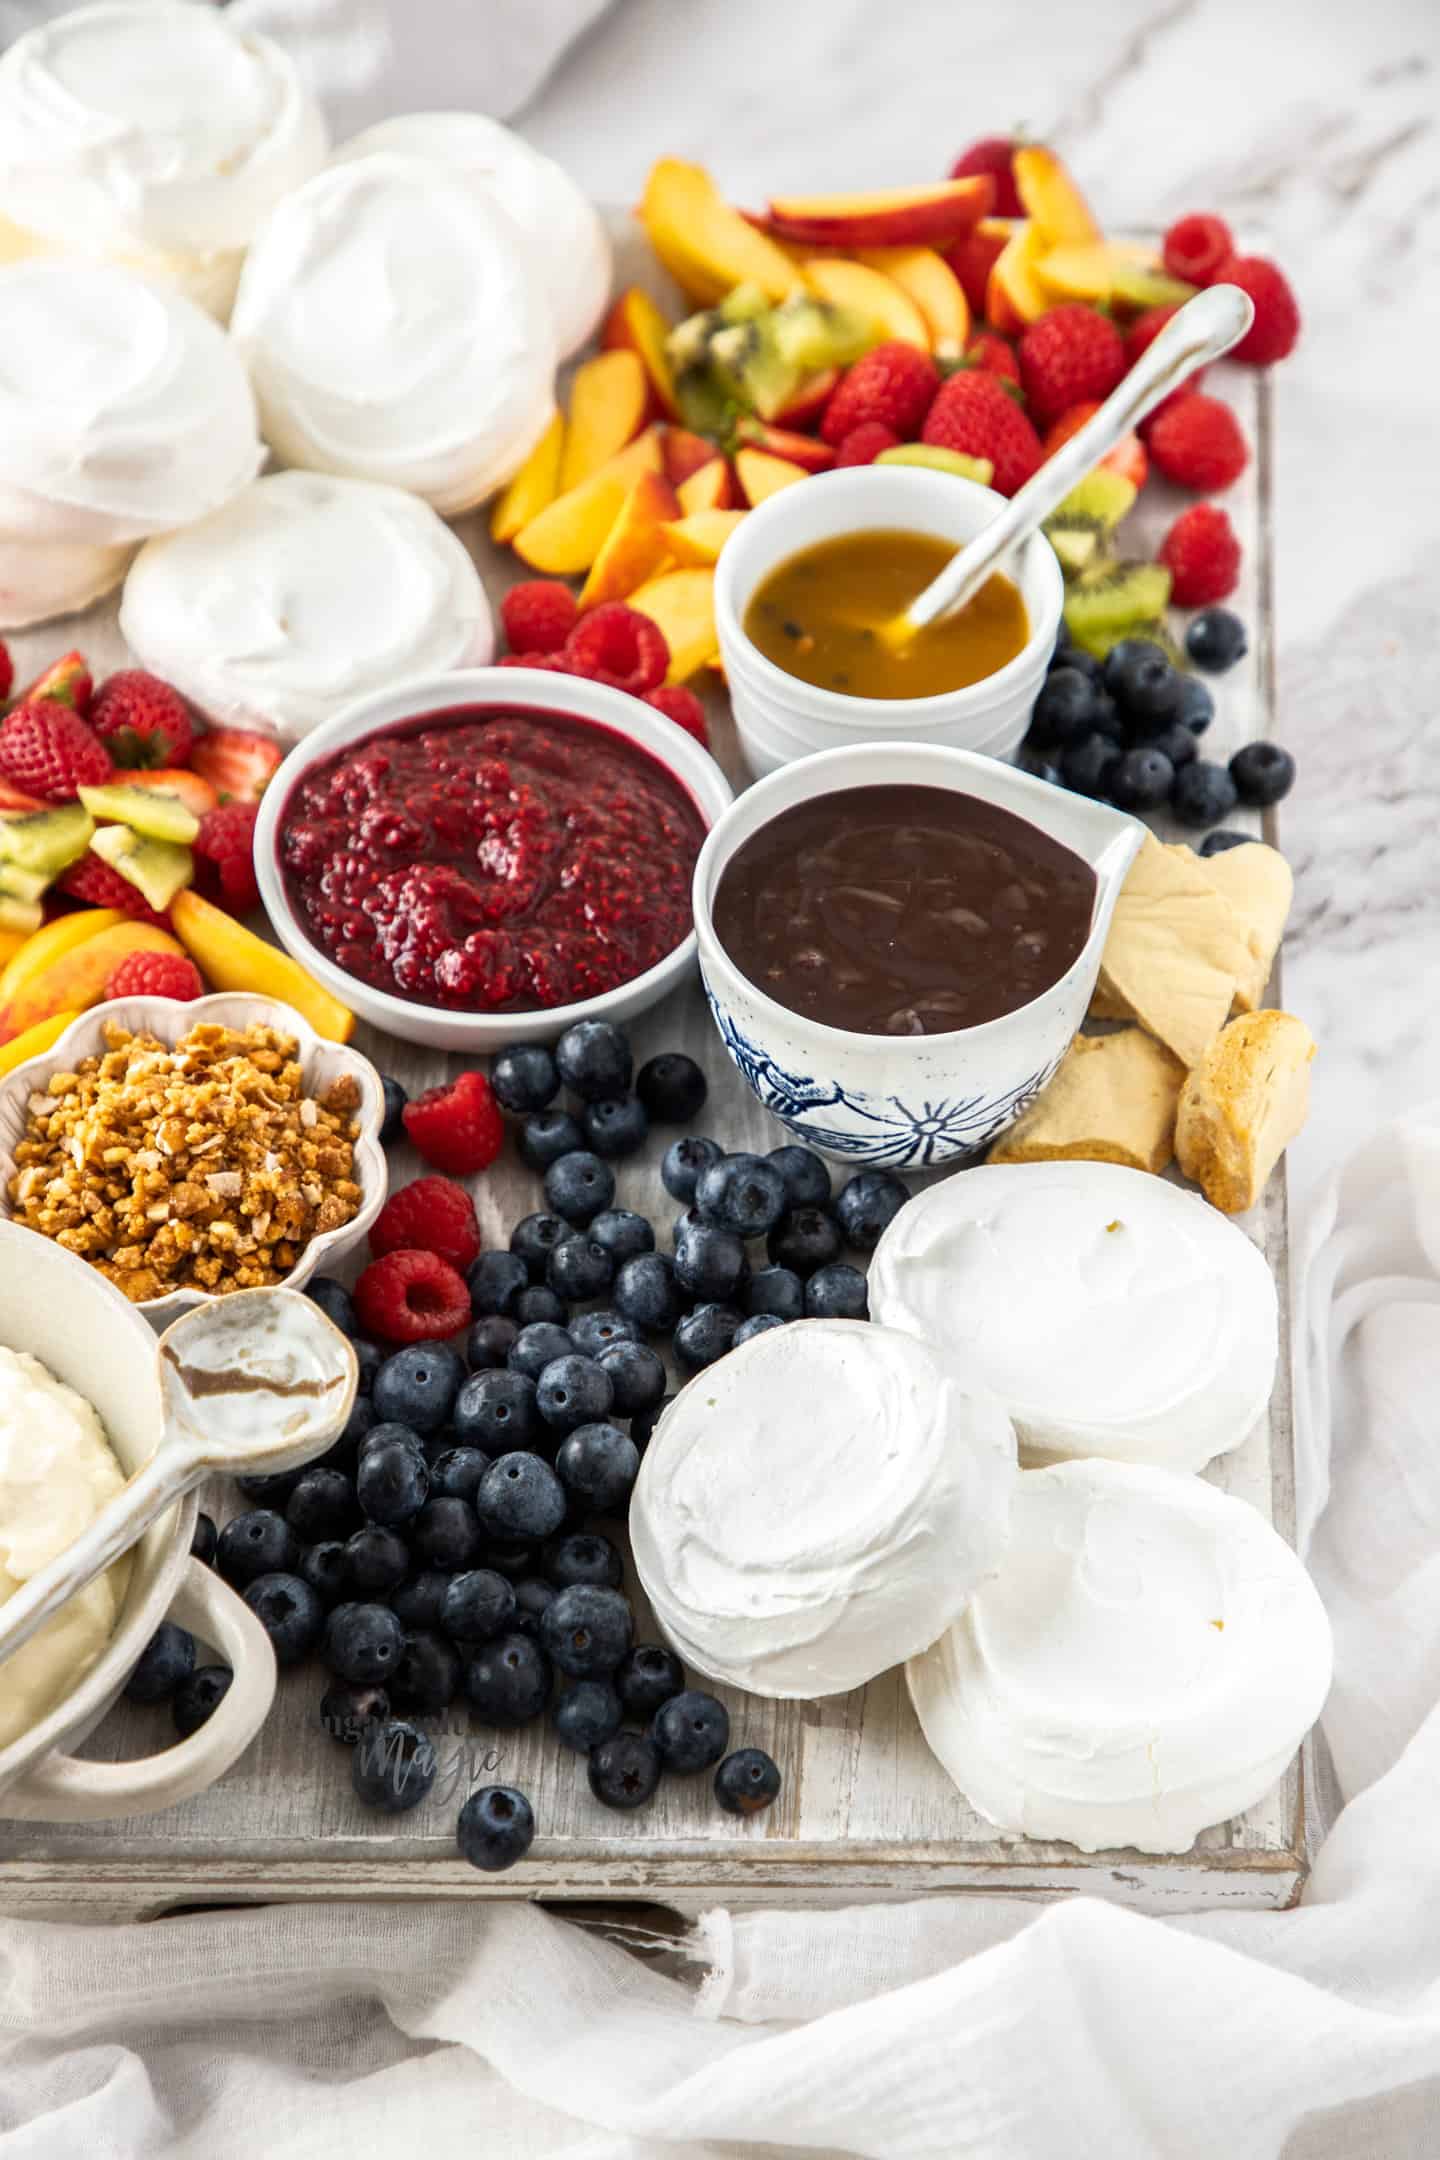 A board filled with meringue shells, sauces and fruit.